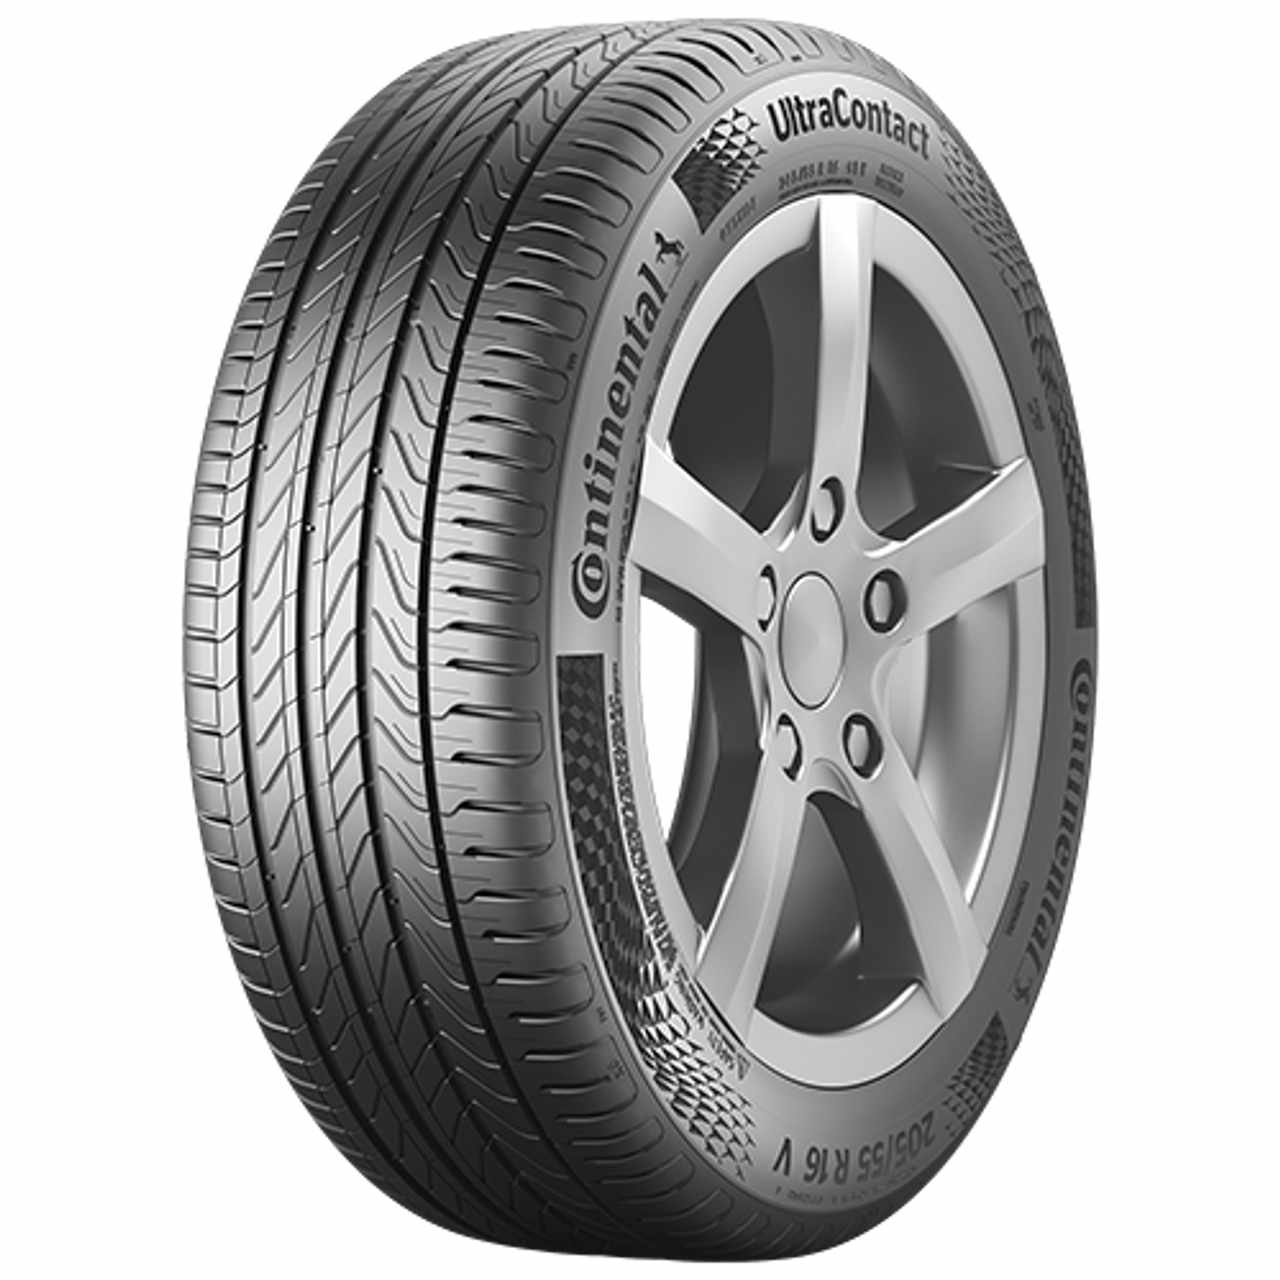 CONTINENTAL ULTRACONTACT (EVc) 195/50R15 82H BSW